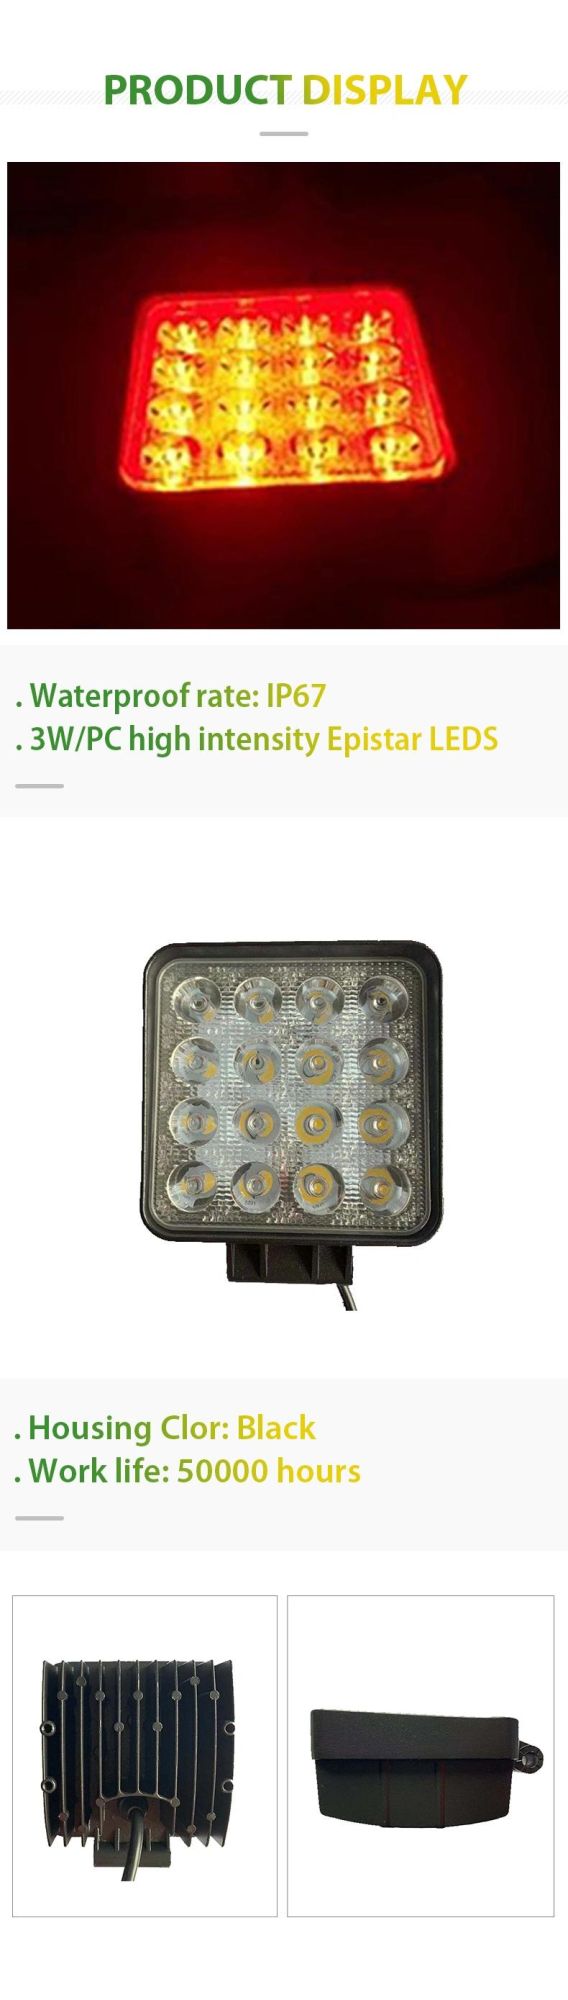 Car Parts CREE LED Working Lights for Jeep Truck ATV SUV Lighting